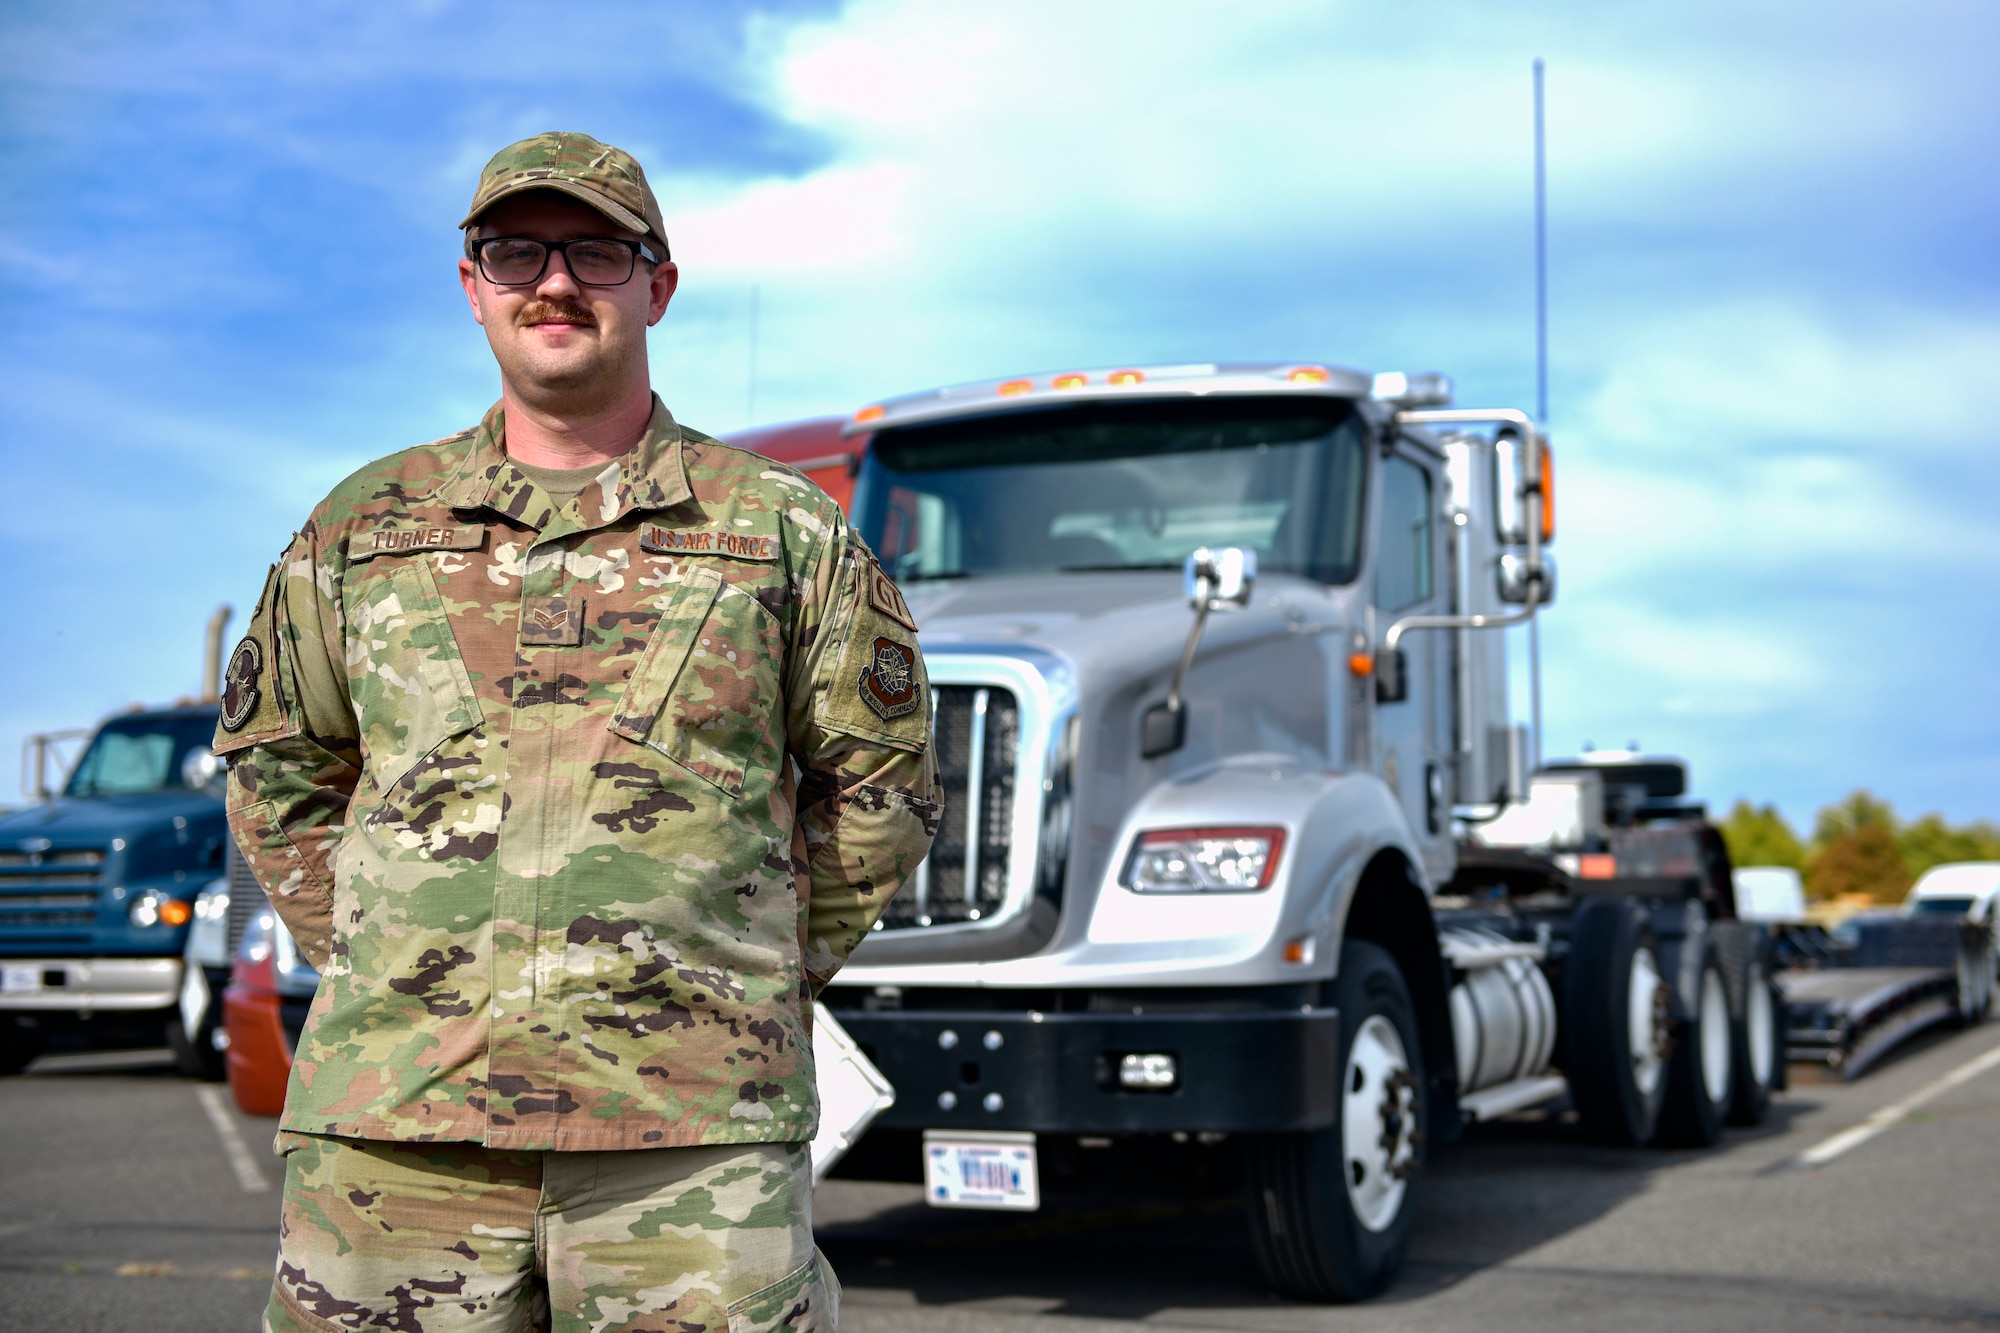 U.S. Air Force Senior Airman Garret Turner, 92nd Logistics Readiness Squadron Ground Transportation specialist, poses in front of a tractor-trailer truck at Fairchild Air Force Base, Washington, Oct. 5, 2021. Out of 48 bases visited by the American Association of Motor Vehicle Administrators, Turner was the first Airman to pass the commercial driver’s license course. (U.S Air Force photo by Senior Airman Ryan Gomez)